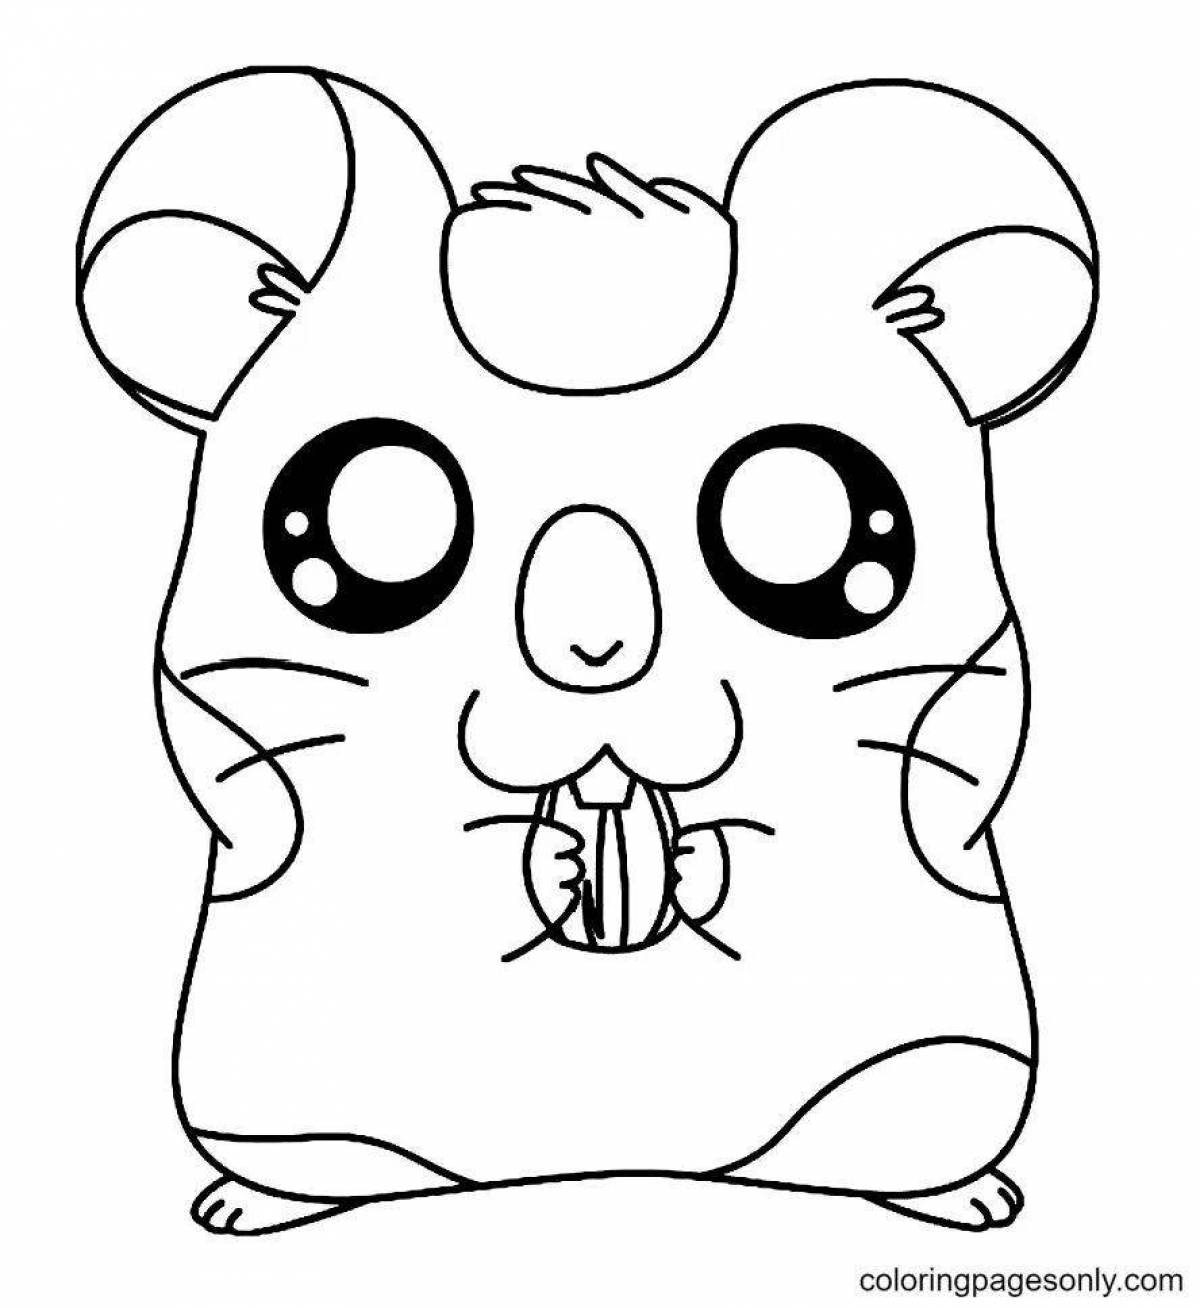 Awesome coloring pages cute easy drawings